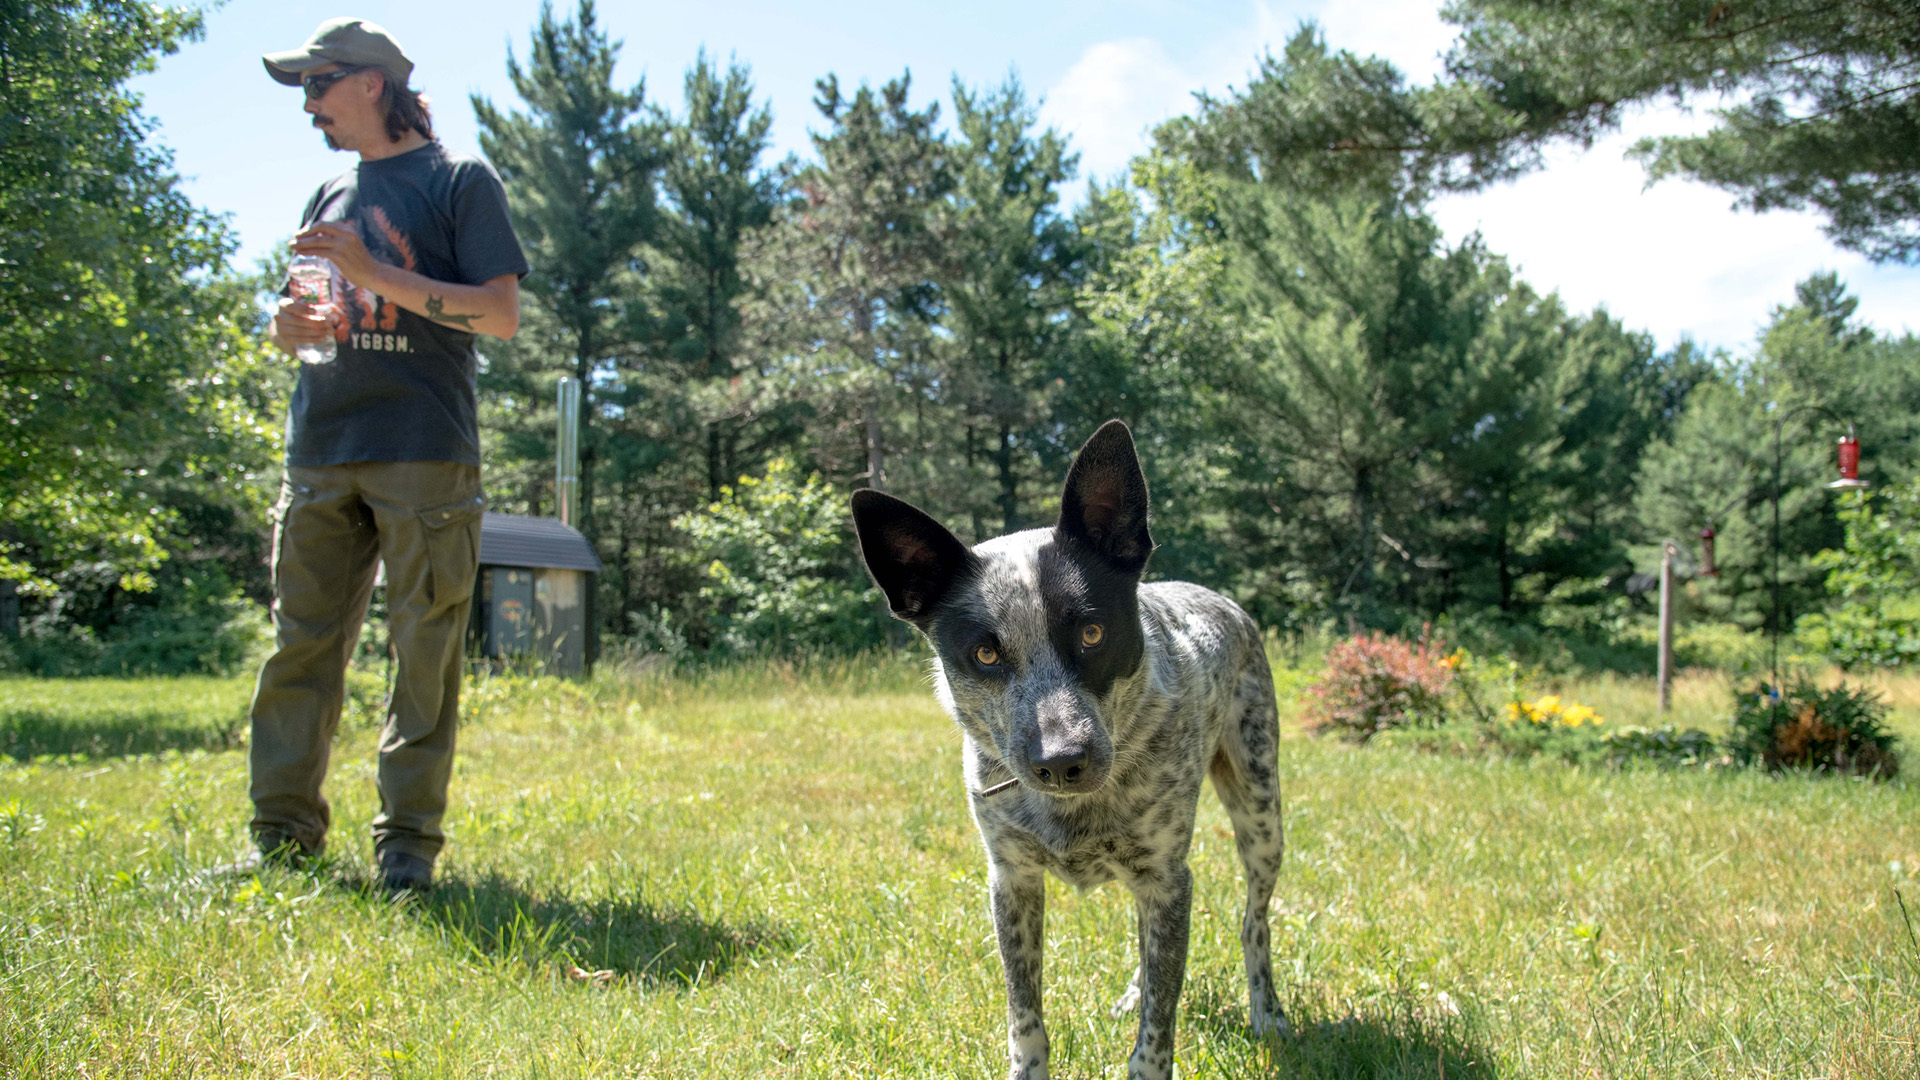 A dog looks into a camera while Zach Skrede stands behind him in a forest clearing, with a small structure and trees in the background.